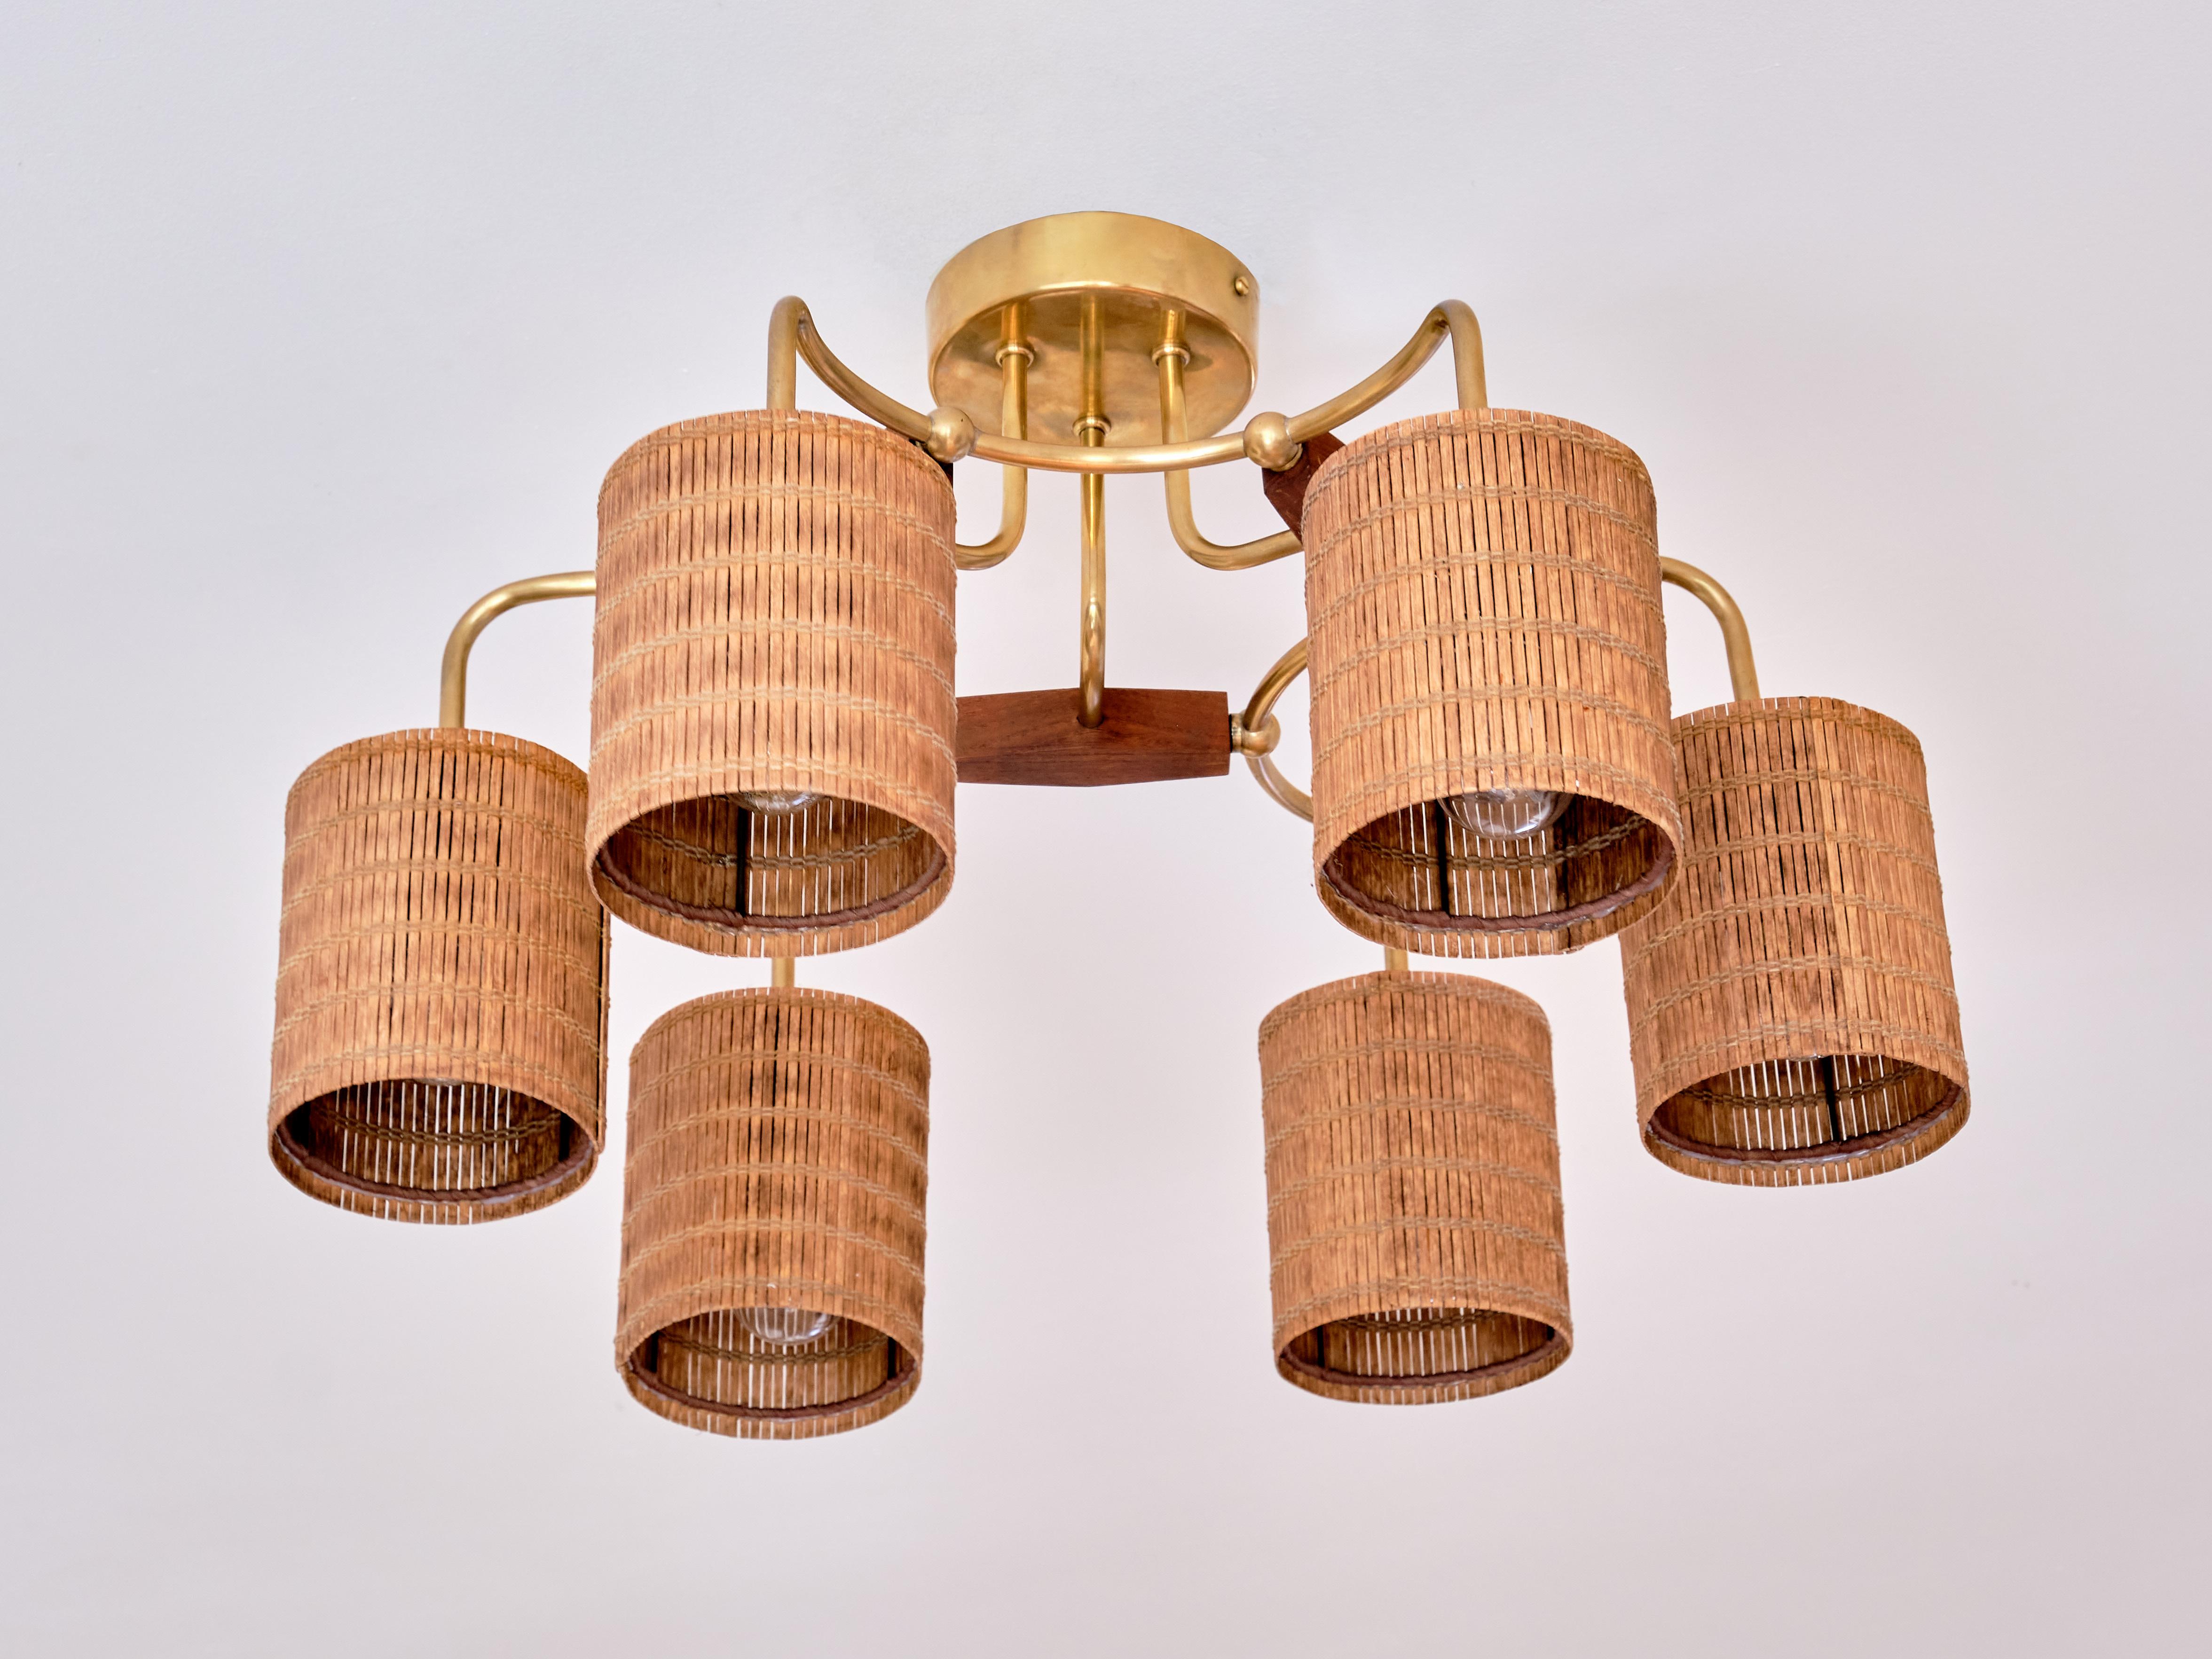 This rare ceiling lamp was designed by Paavo Tynell and produced by Idman Oy in Finland in the 1950s. The brass fixture consists of six arms with six indivual lamp shades. Three teak wood elements connect the pairs of brass arms with the ceiling